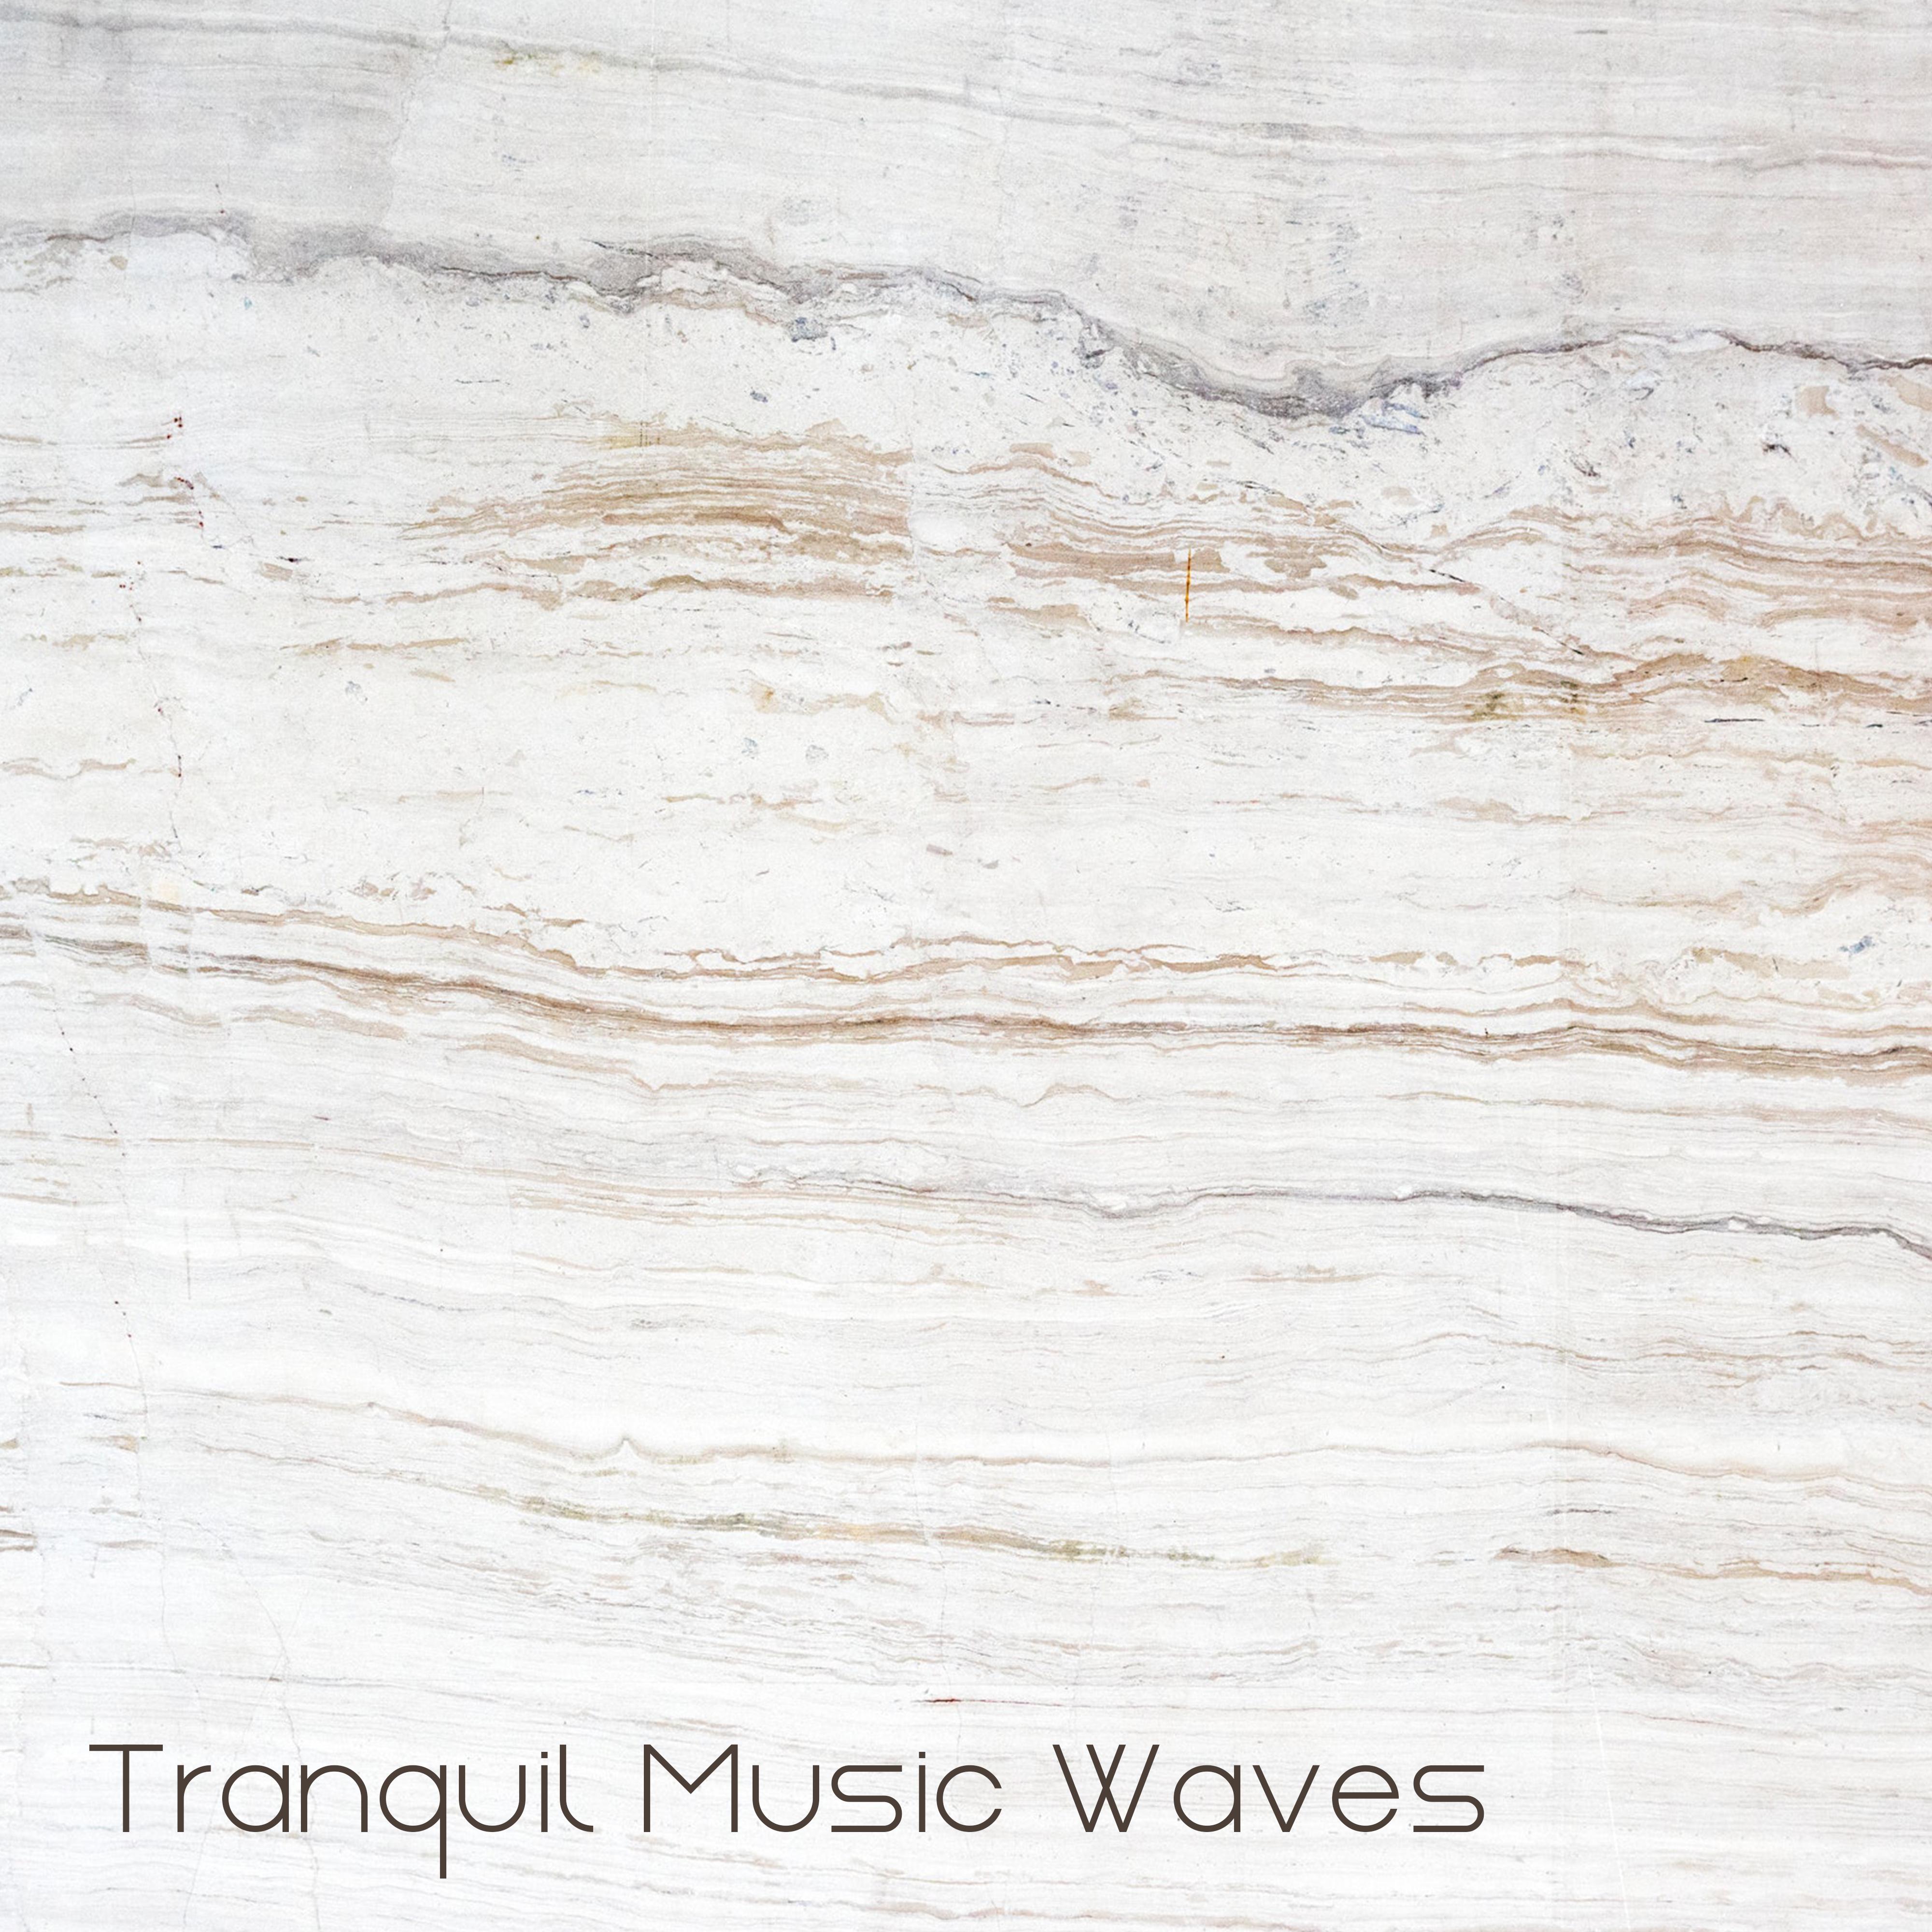 Tranquil Music Waves